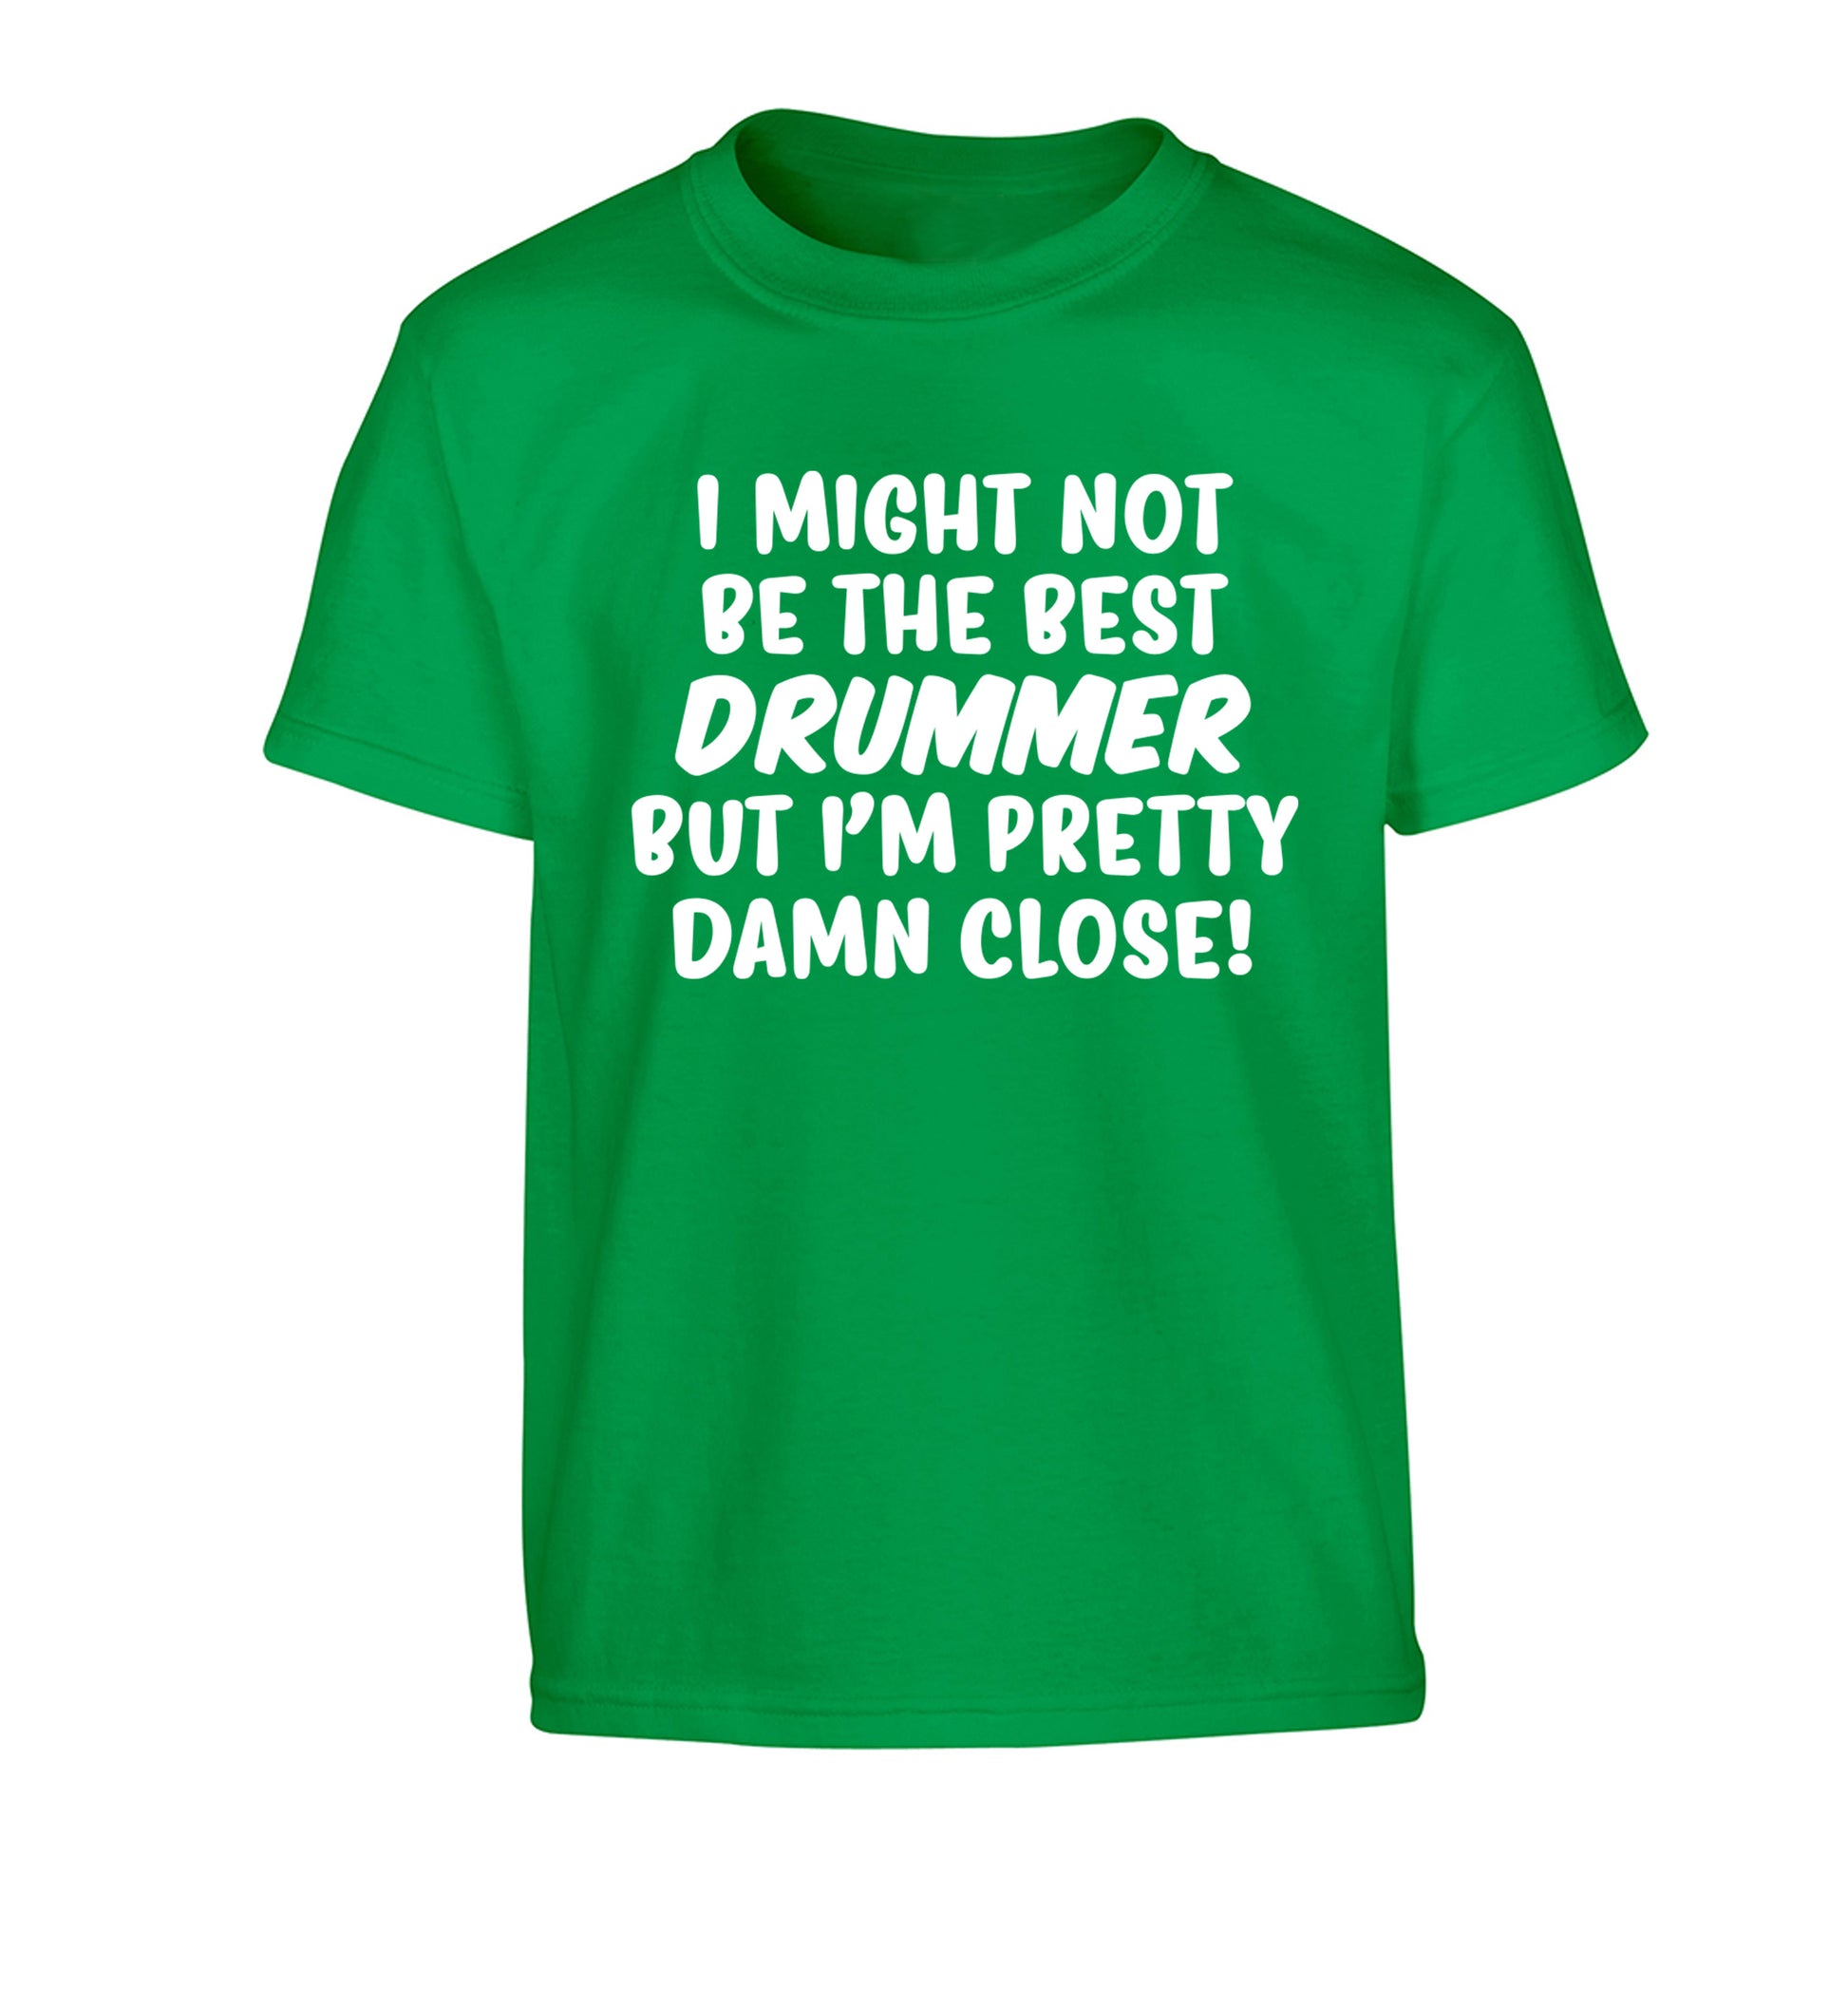 I might not be the best drummer but I'm pretty close! Children's green Tshirt 12-14 Years